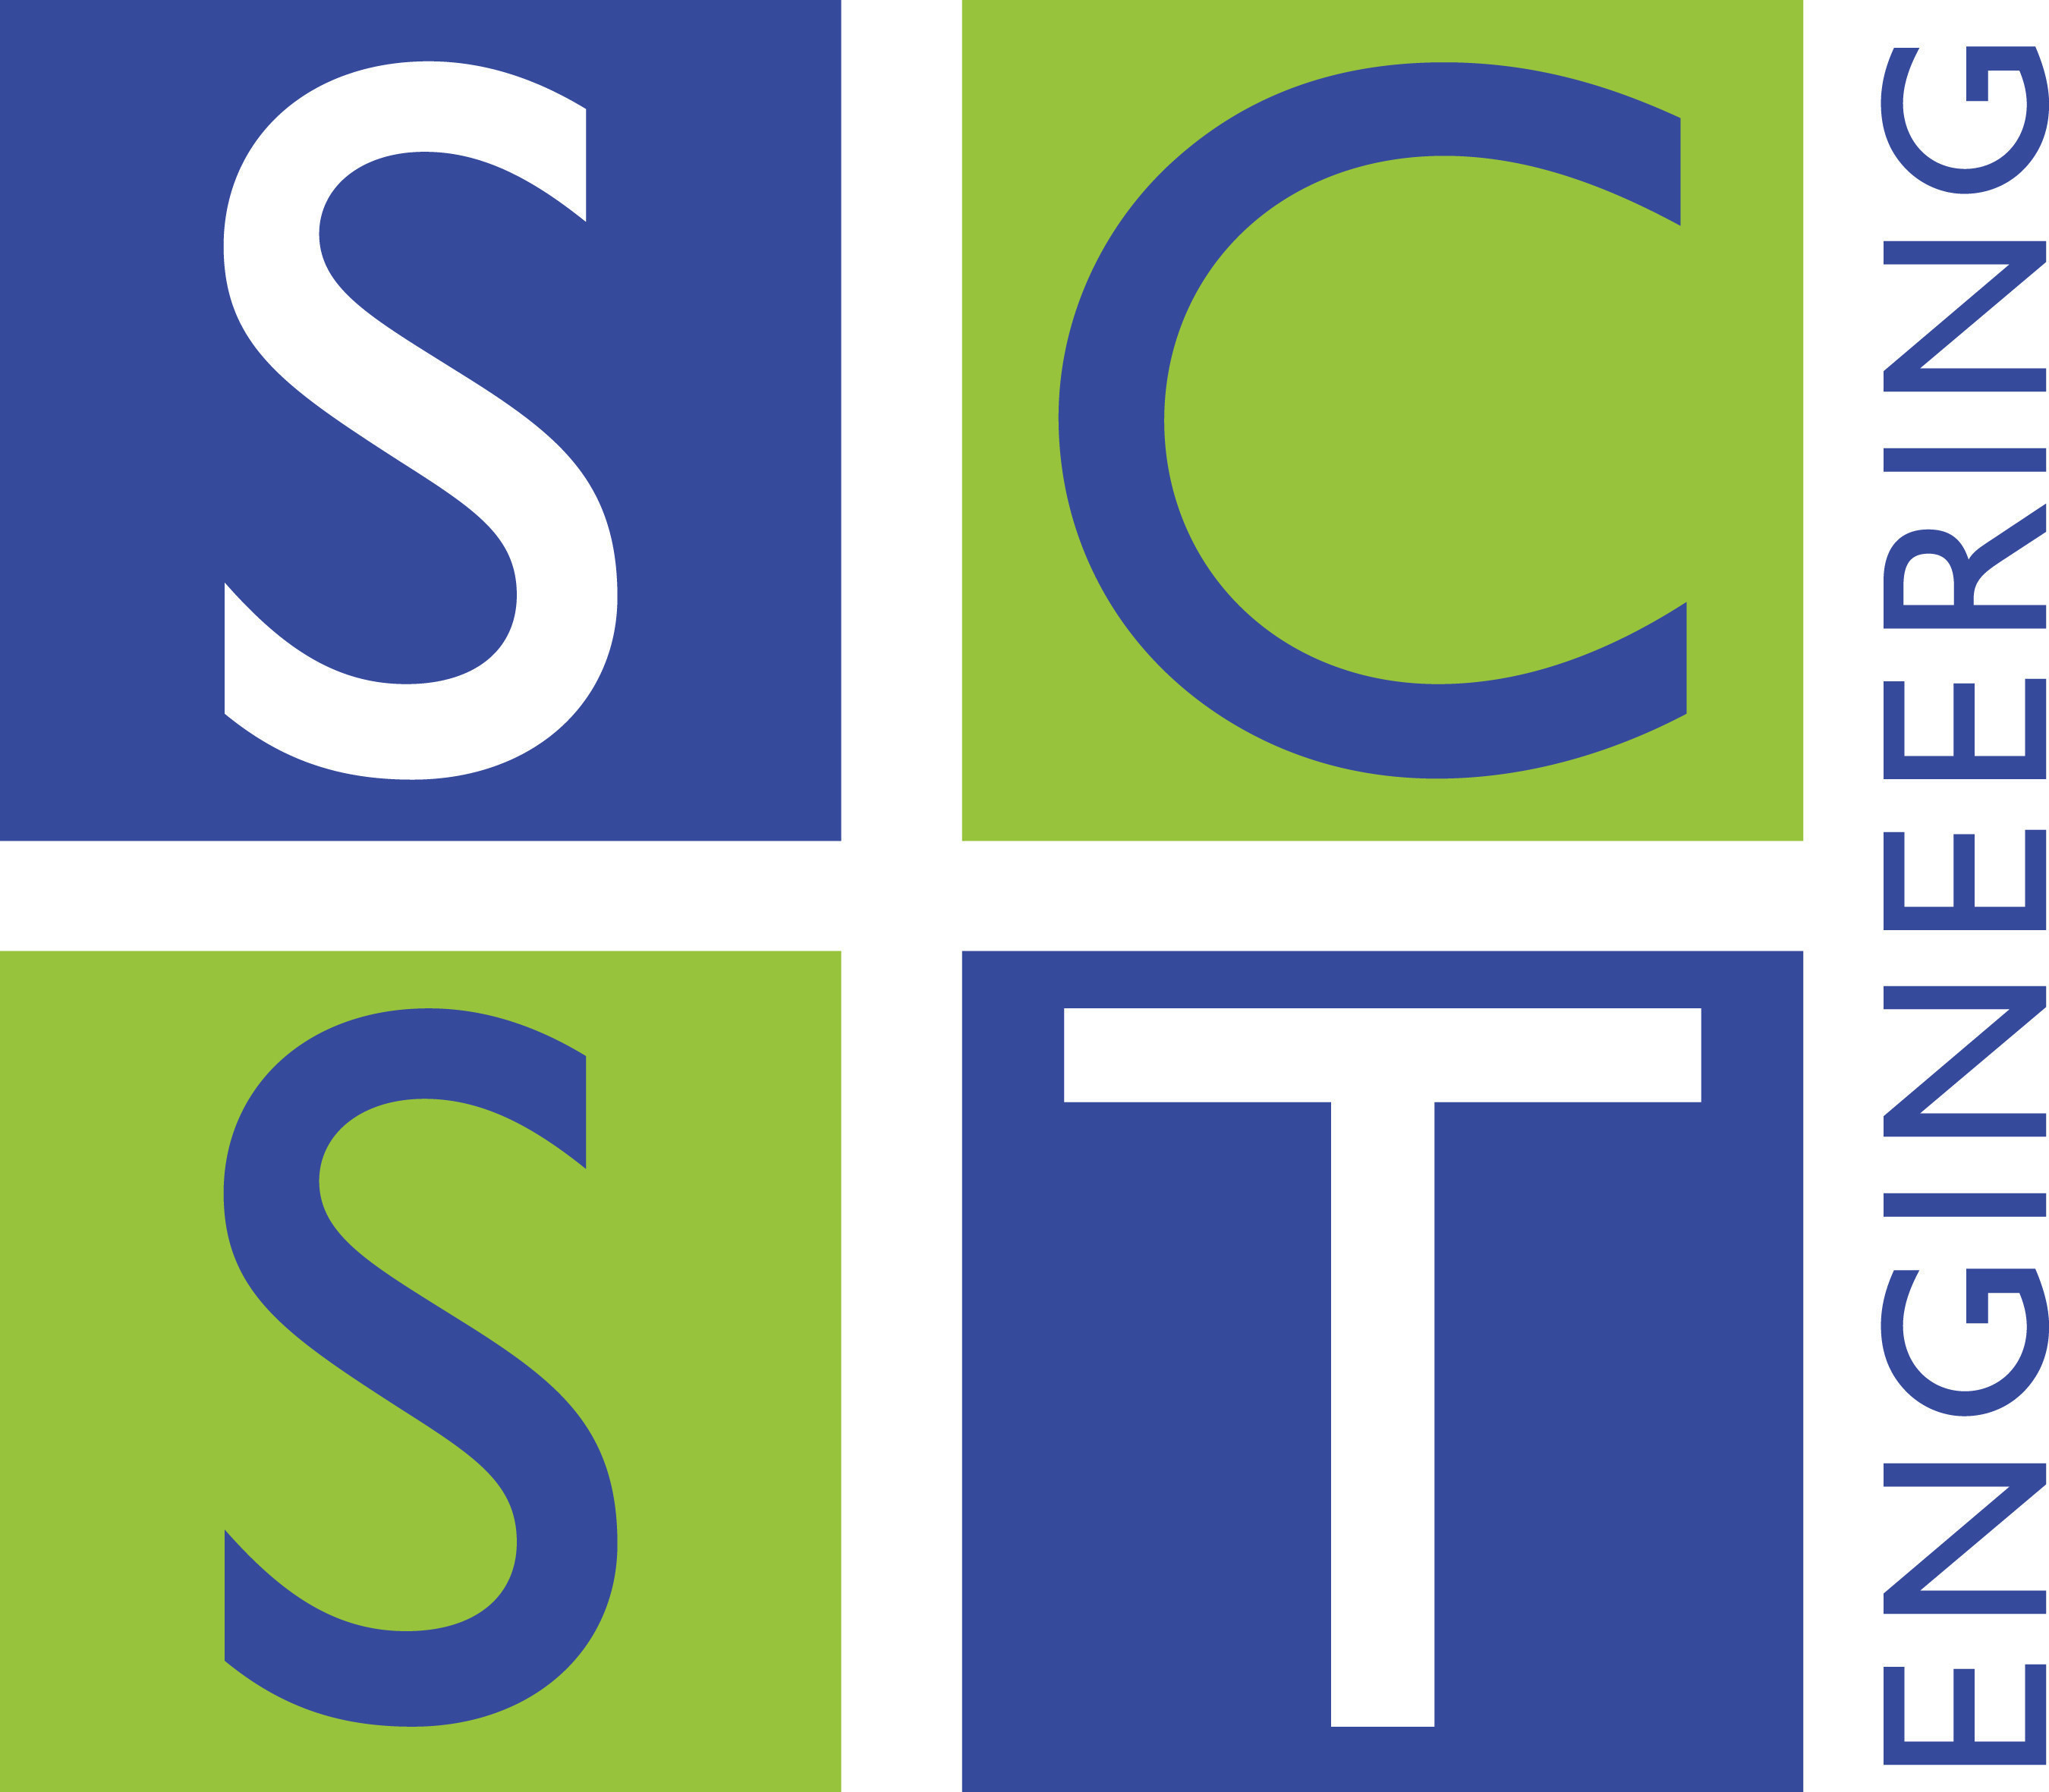 Southern California Soil & Testing, Inc. has legally changed its name to SCST, Inc